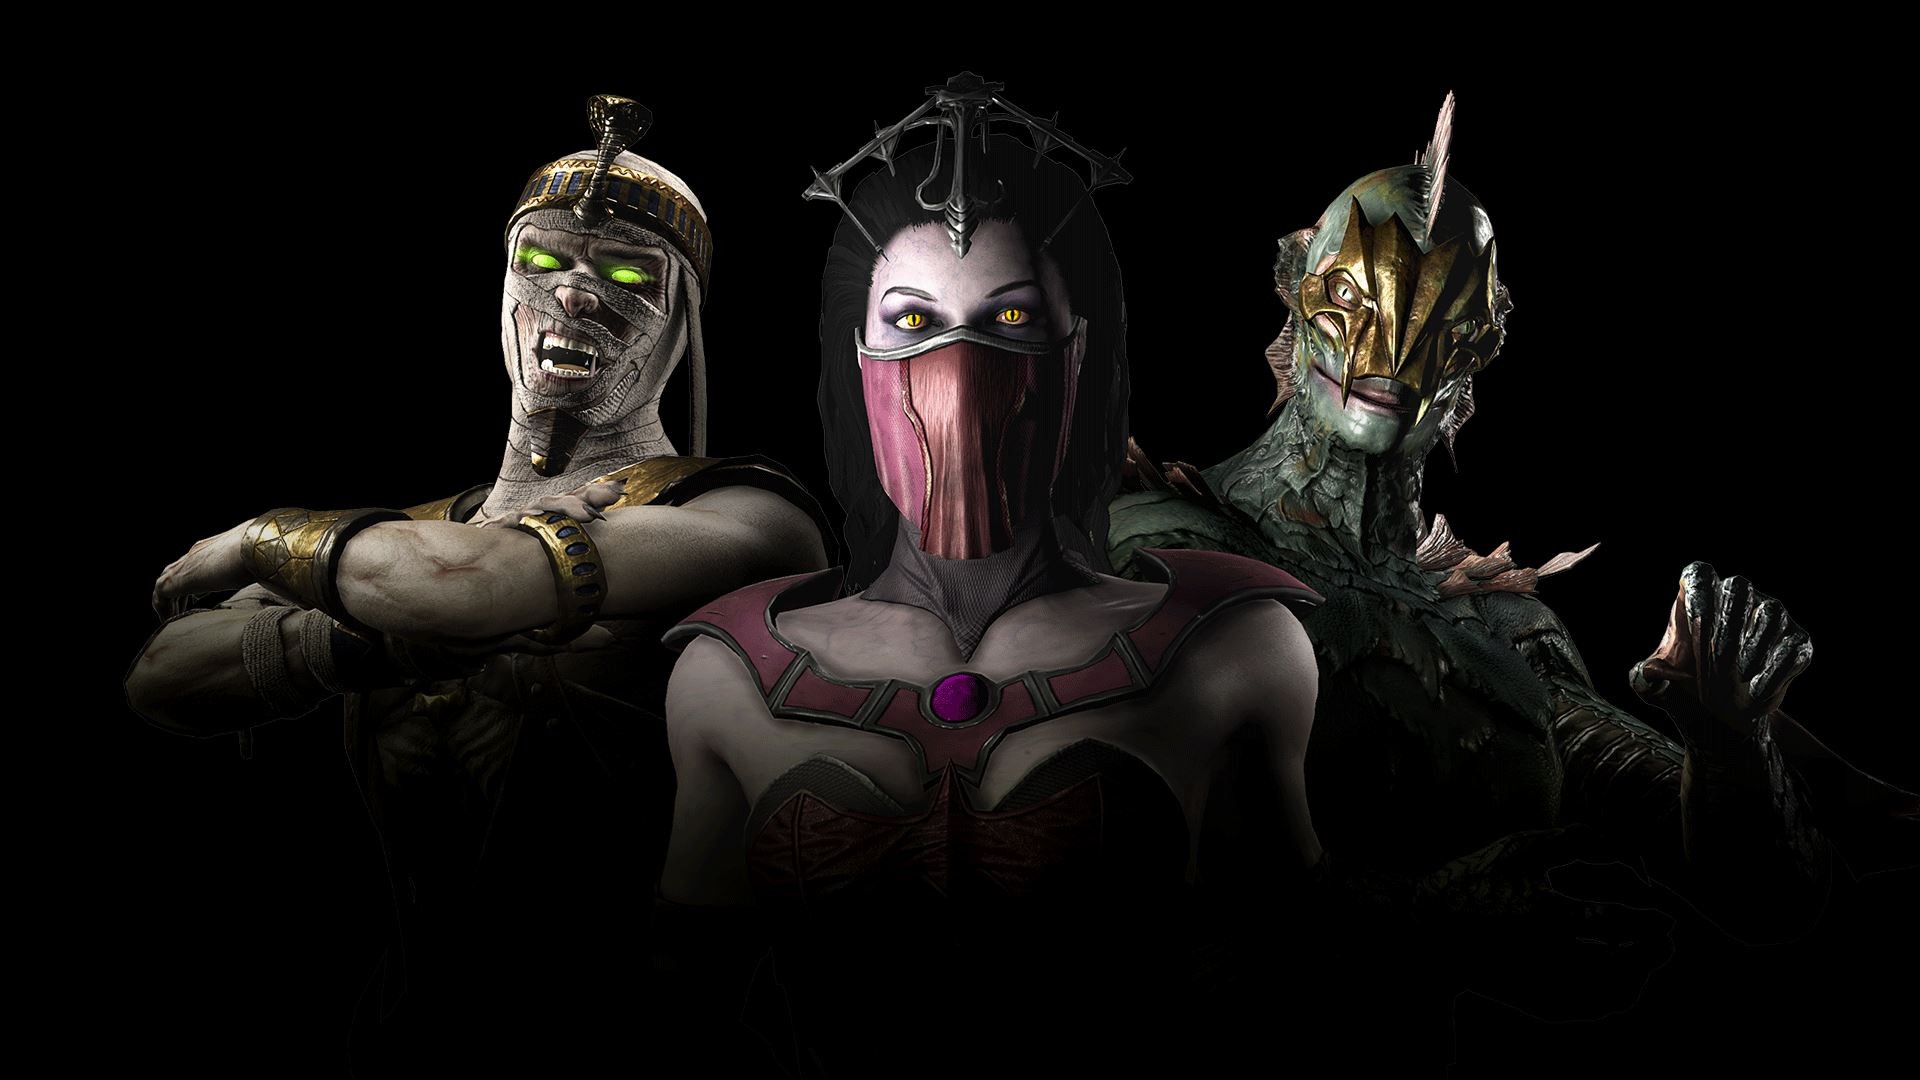 General 1920x1080 Mortal Kombat X video games video game warriors video game girls glowing eyes mask women creature black background simple background video game characters